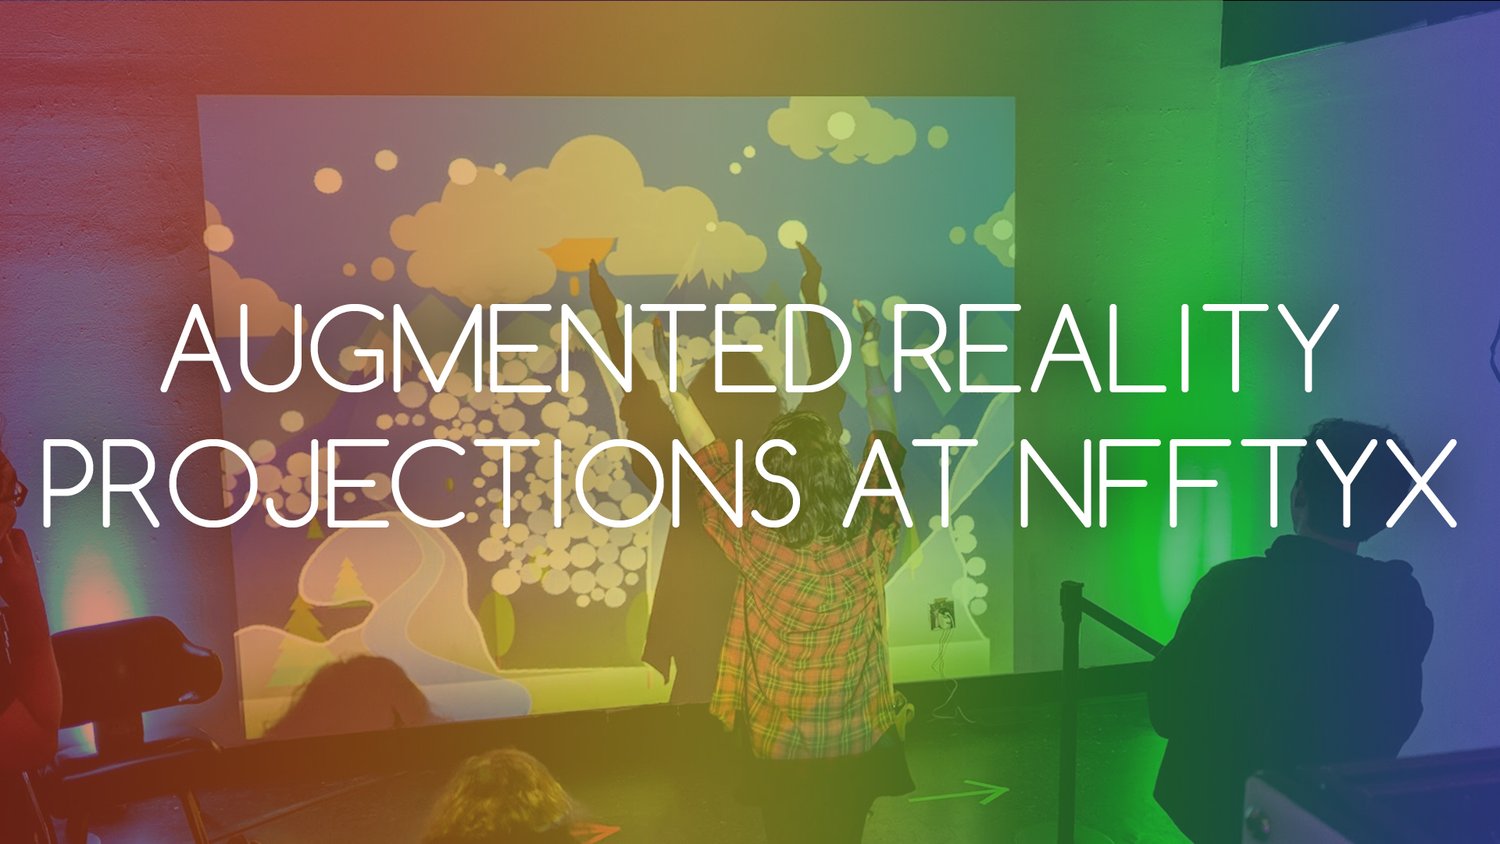 Augmented Reality Projection Mapping at NFFTYX - Blog — Sensebellum